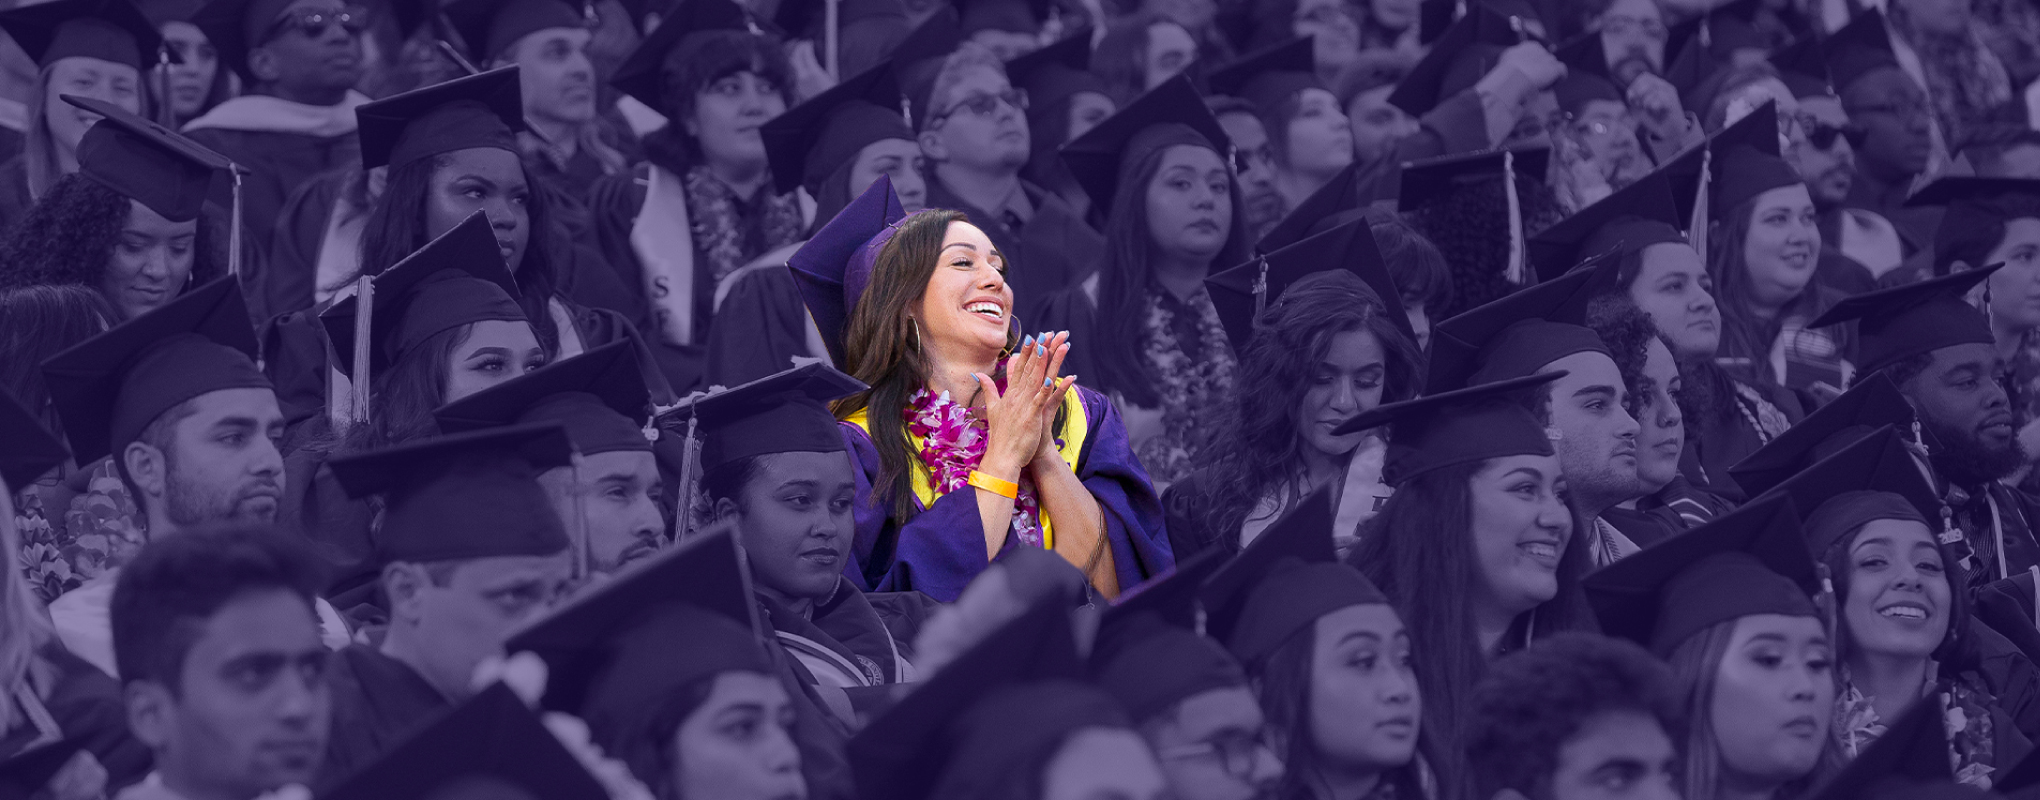 SF State graduate cheers with excitement in a sea of purple regalia